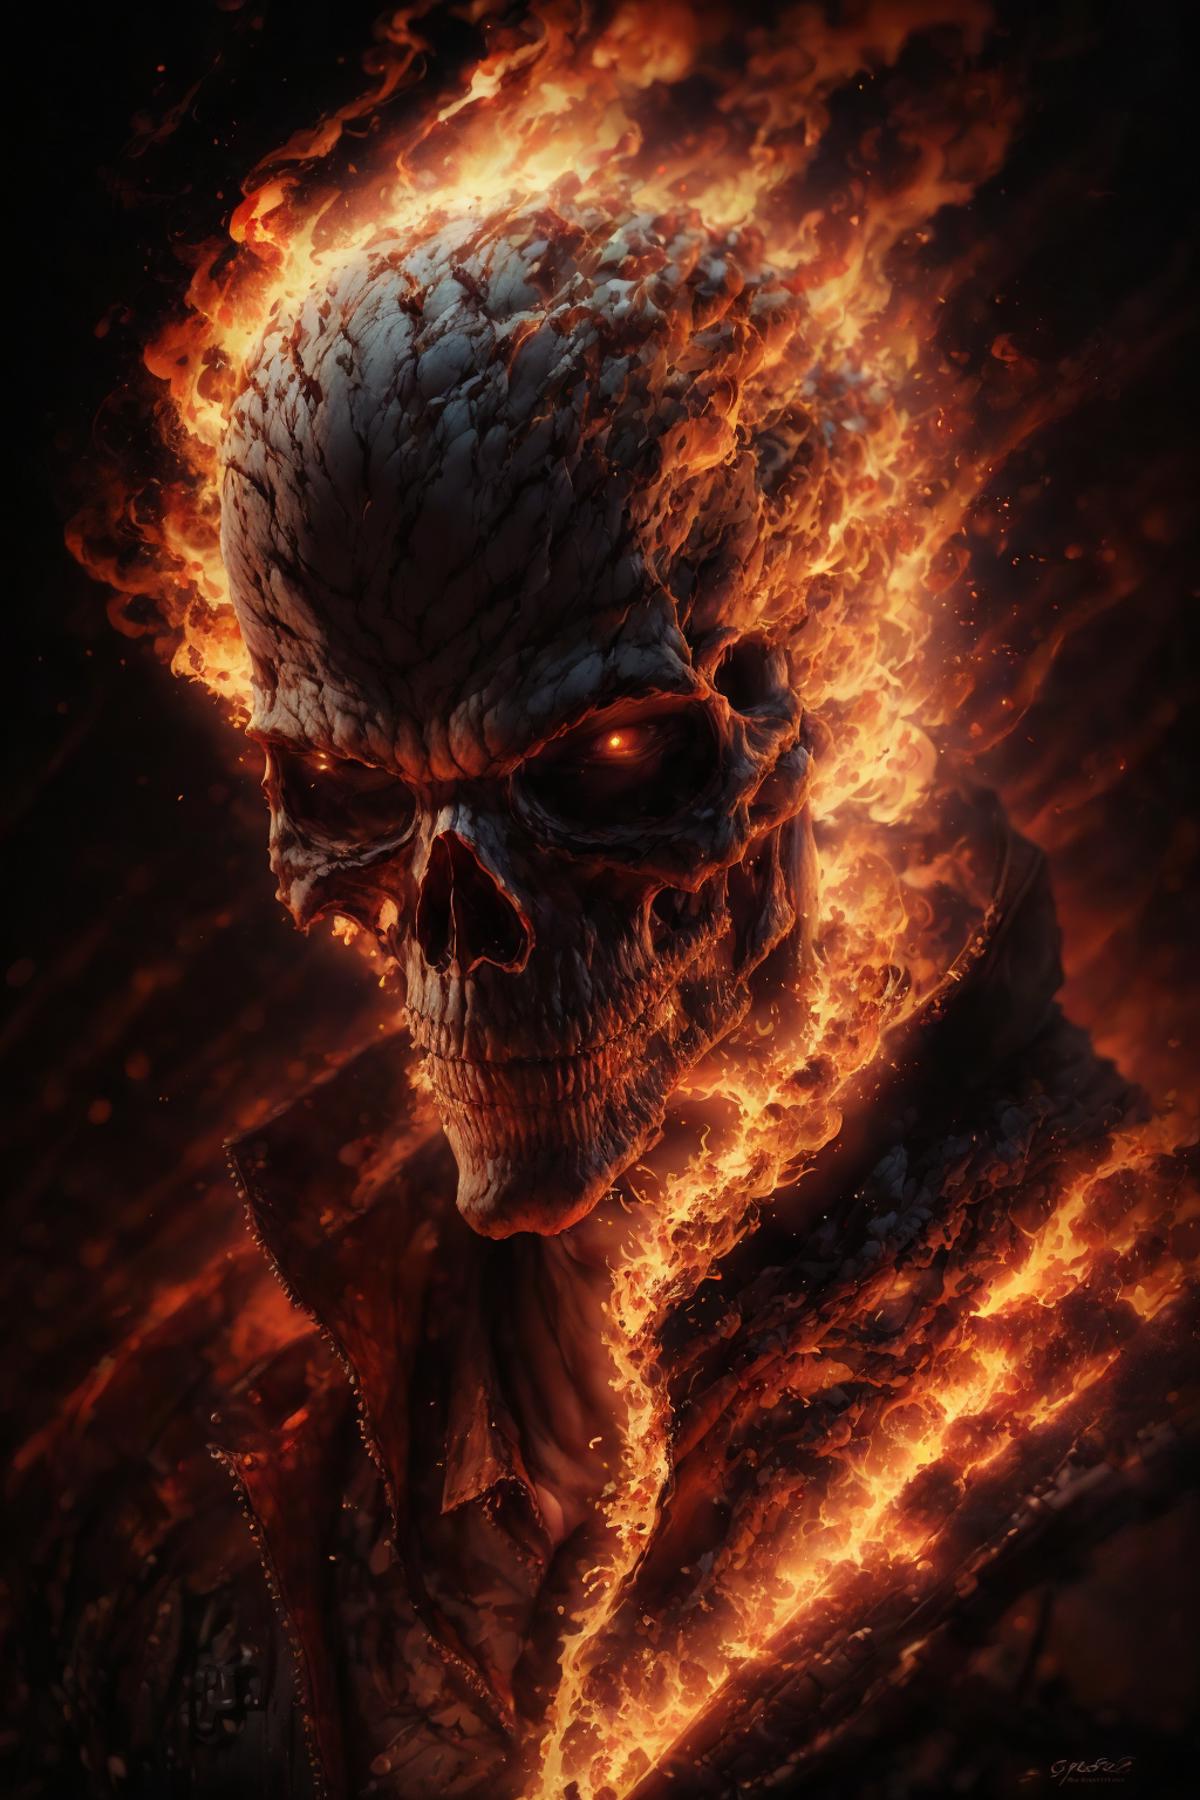 A detailed and artistic portrait of a fiery skull.